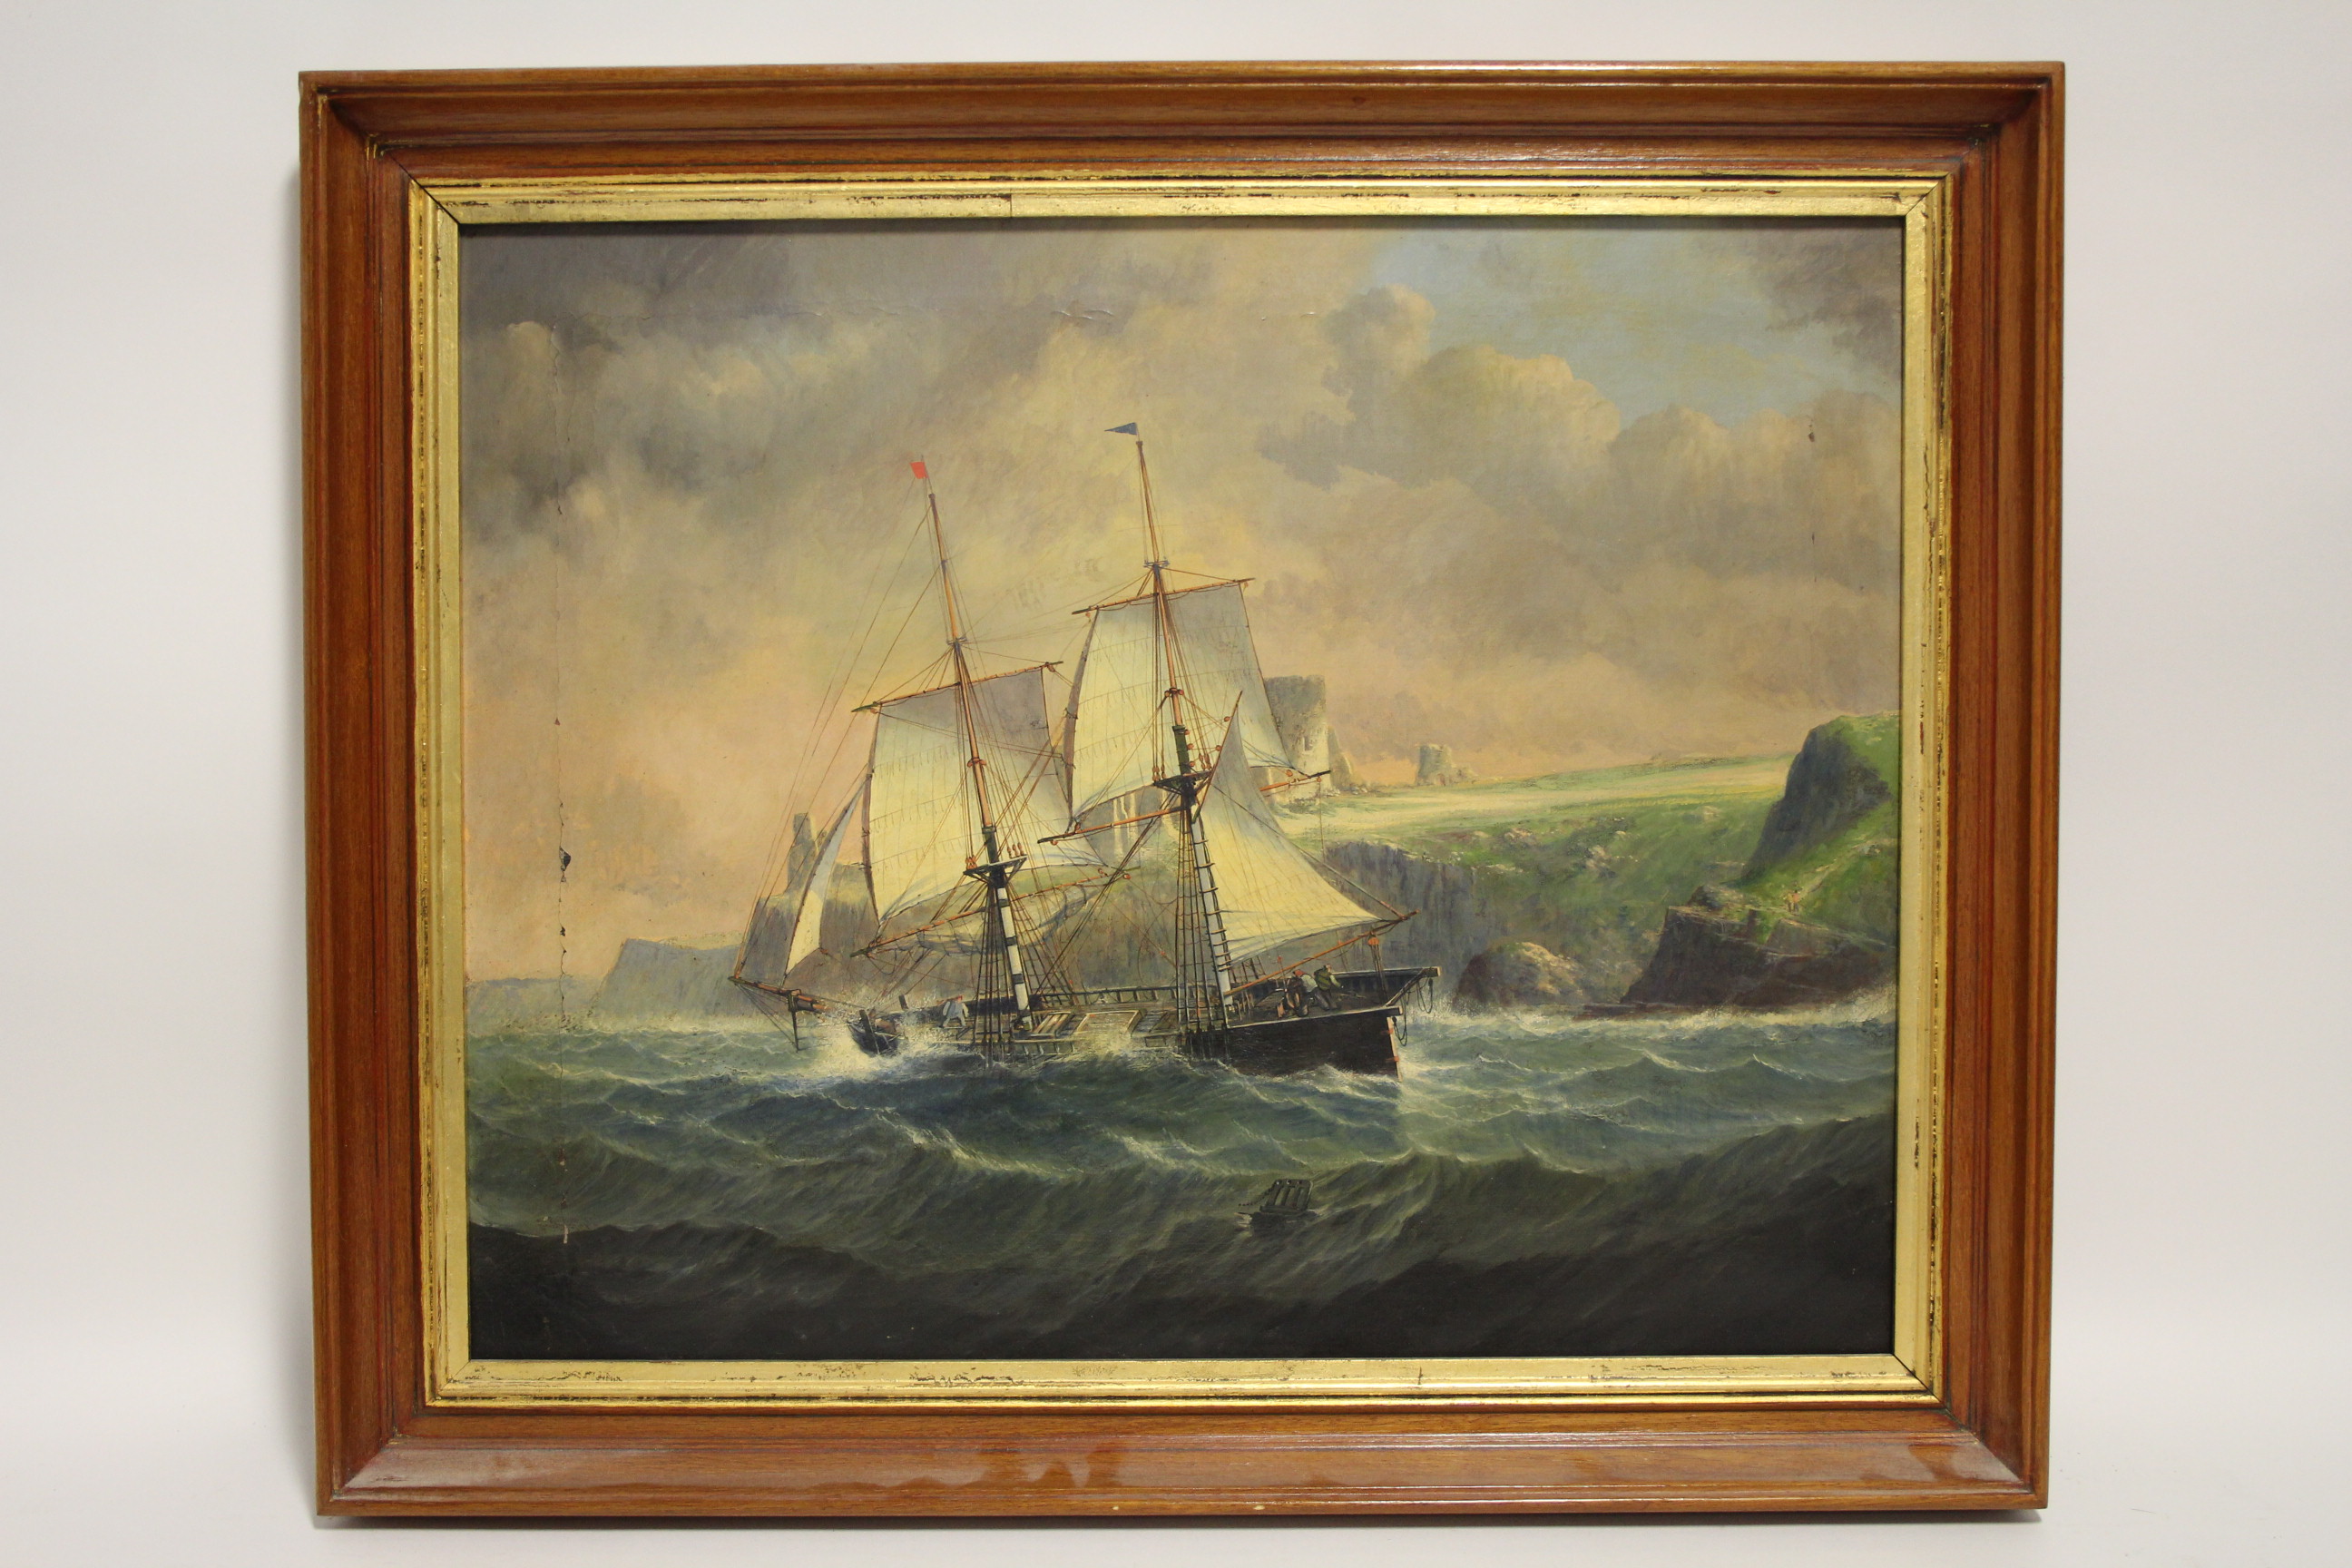 ENGLISH SCHOOL, 19th century. A two-masted cargo vessel off Tantallon Castle. Signed with